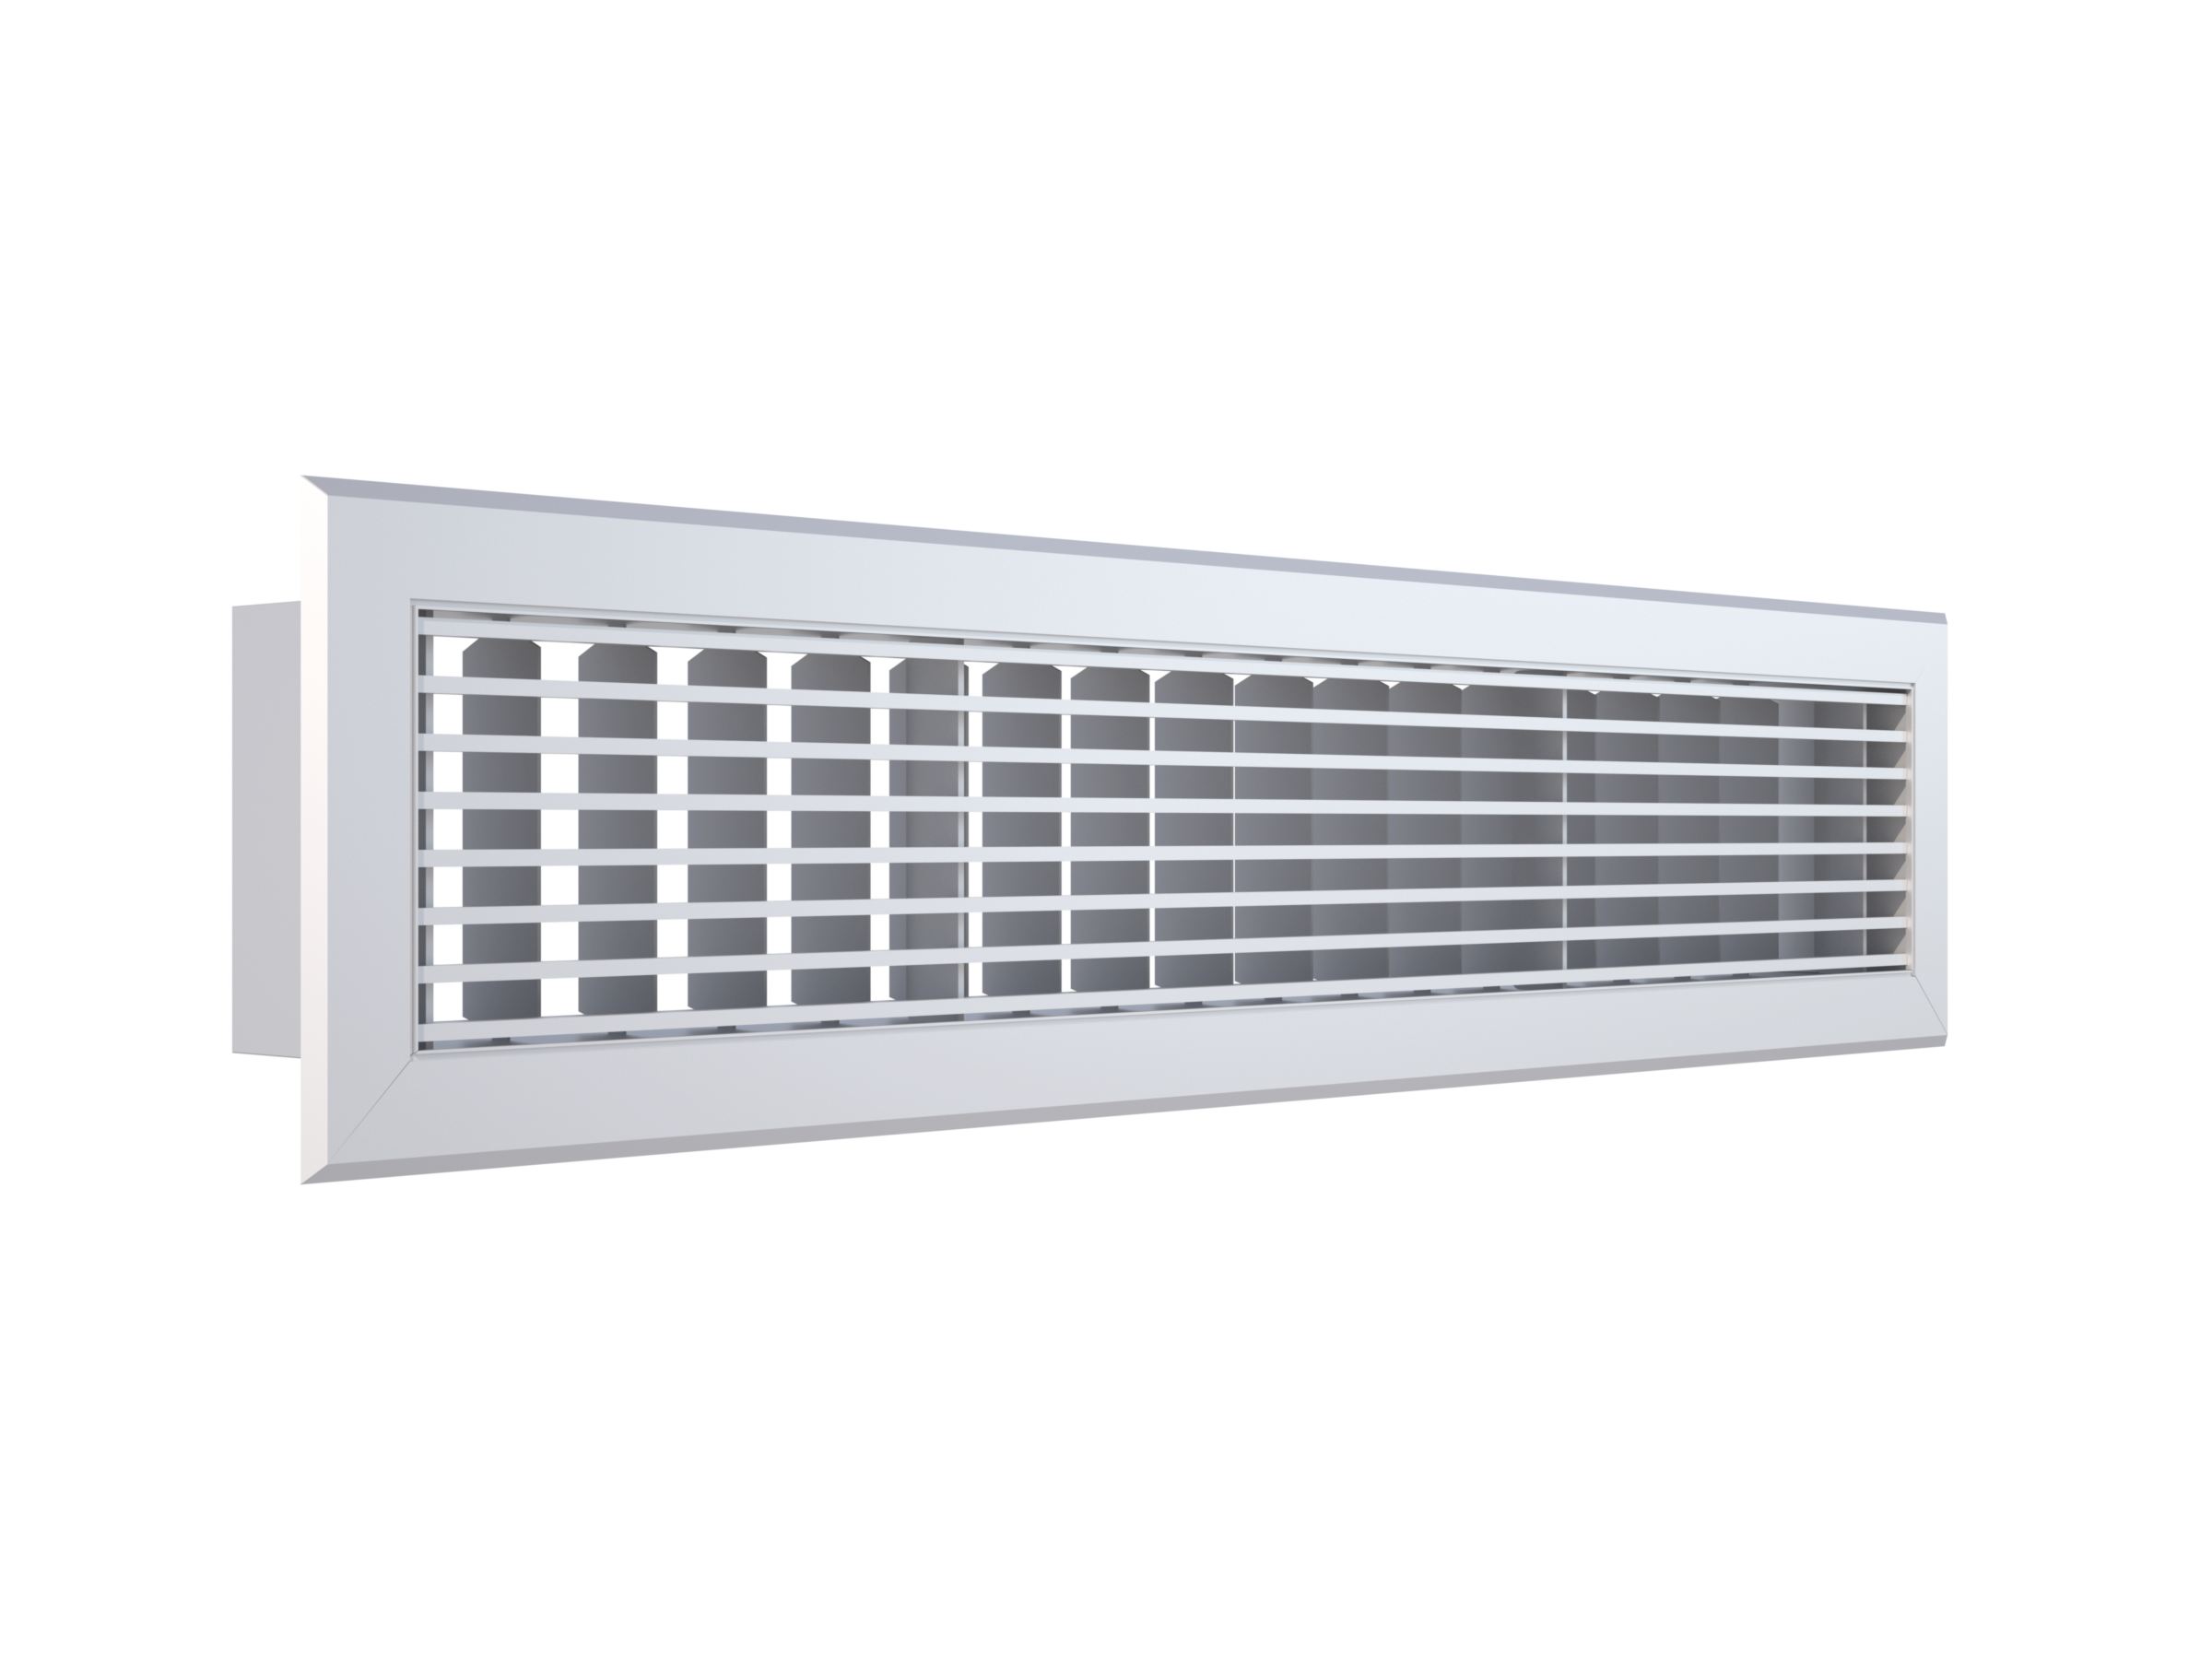 Holyoake LD-1200SD Linear Bar Grille with 0-degree air discharge and 12mm blade spacing with rear adjustable blades